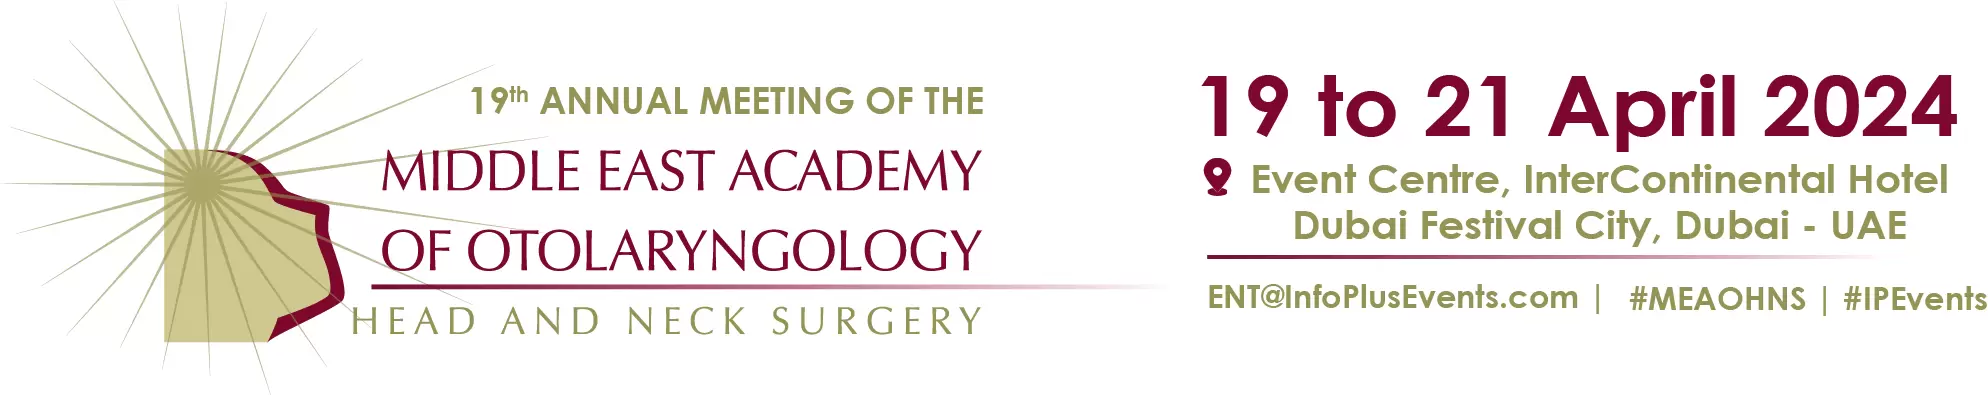 19th Annual Meeting of Middle East Academy of Otolaryngology